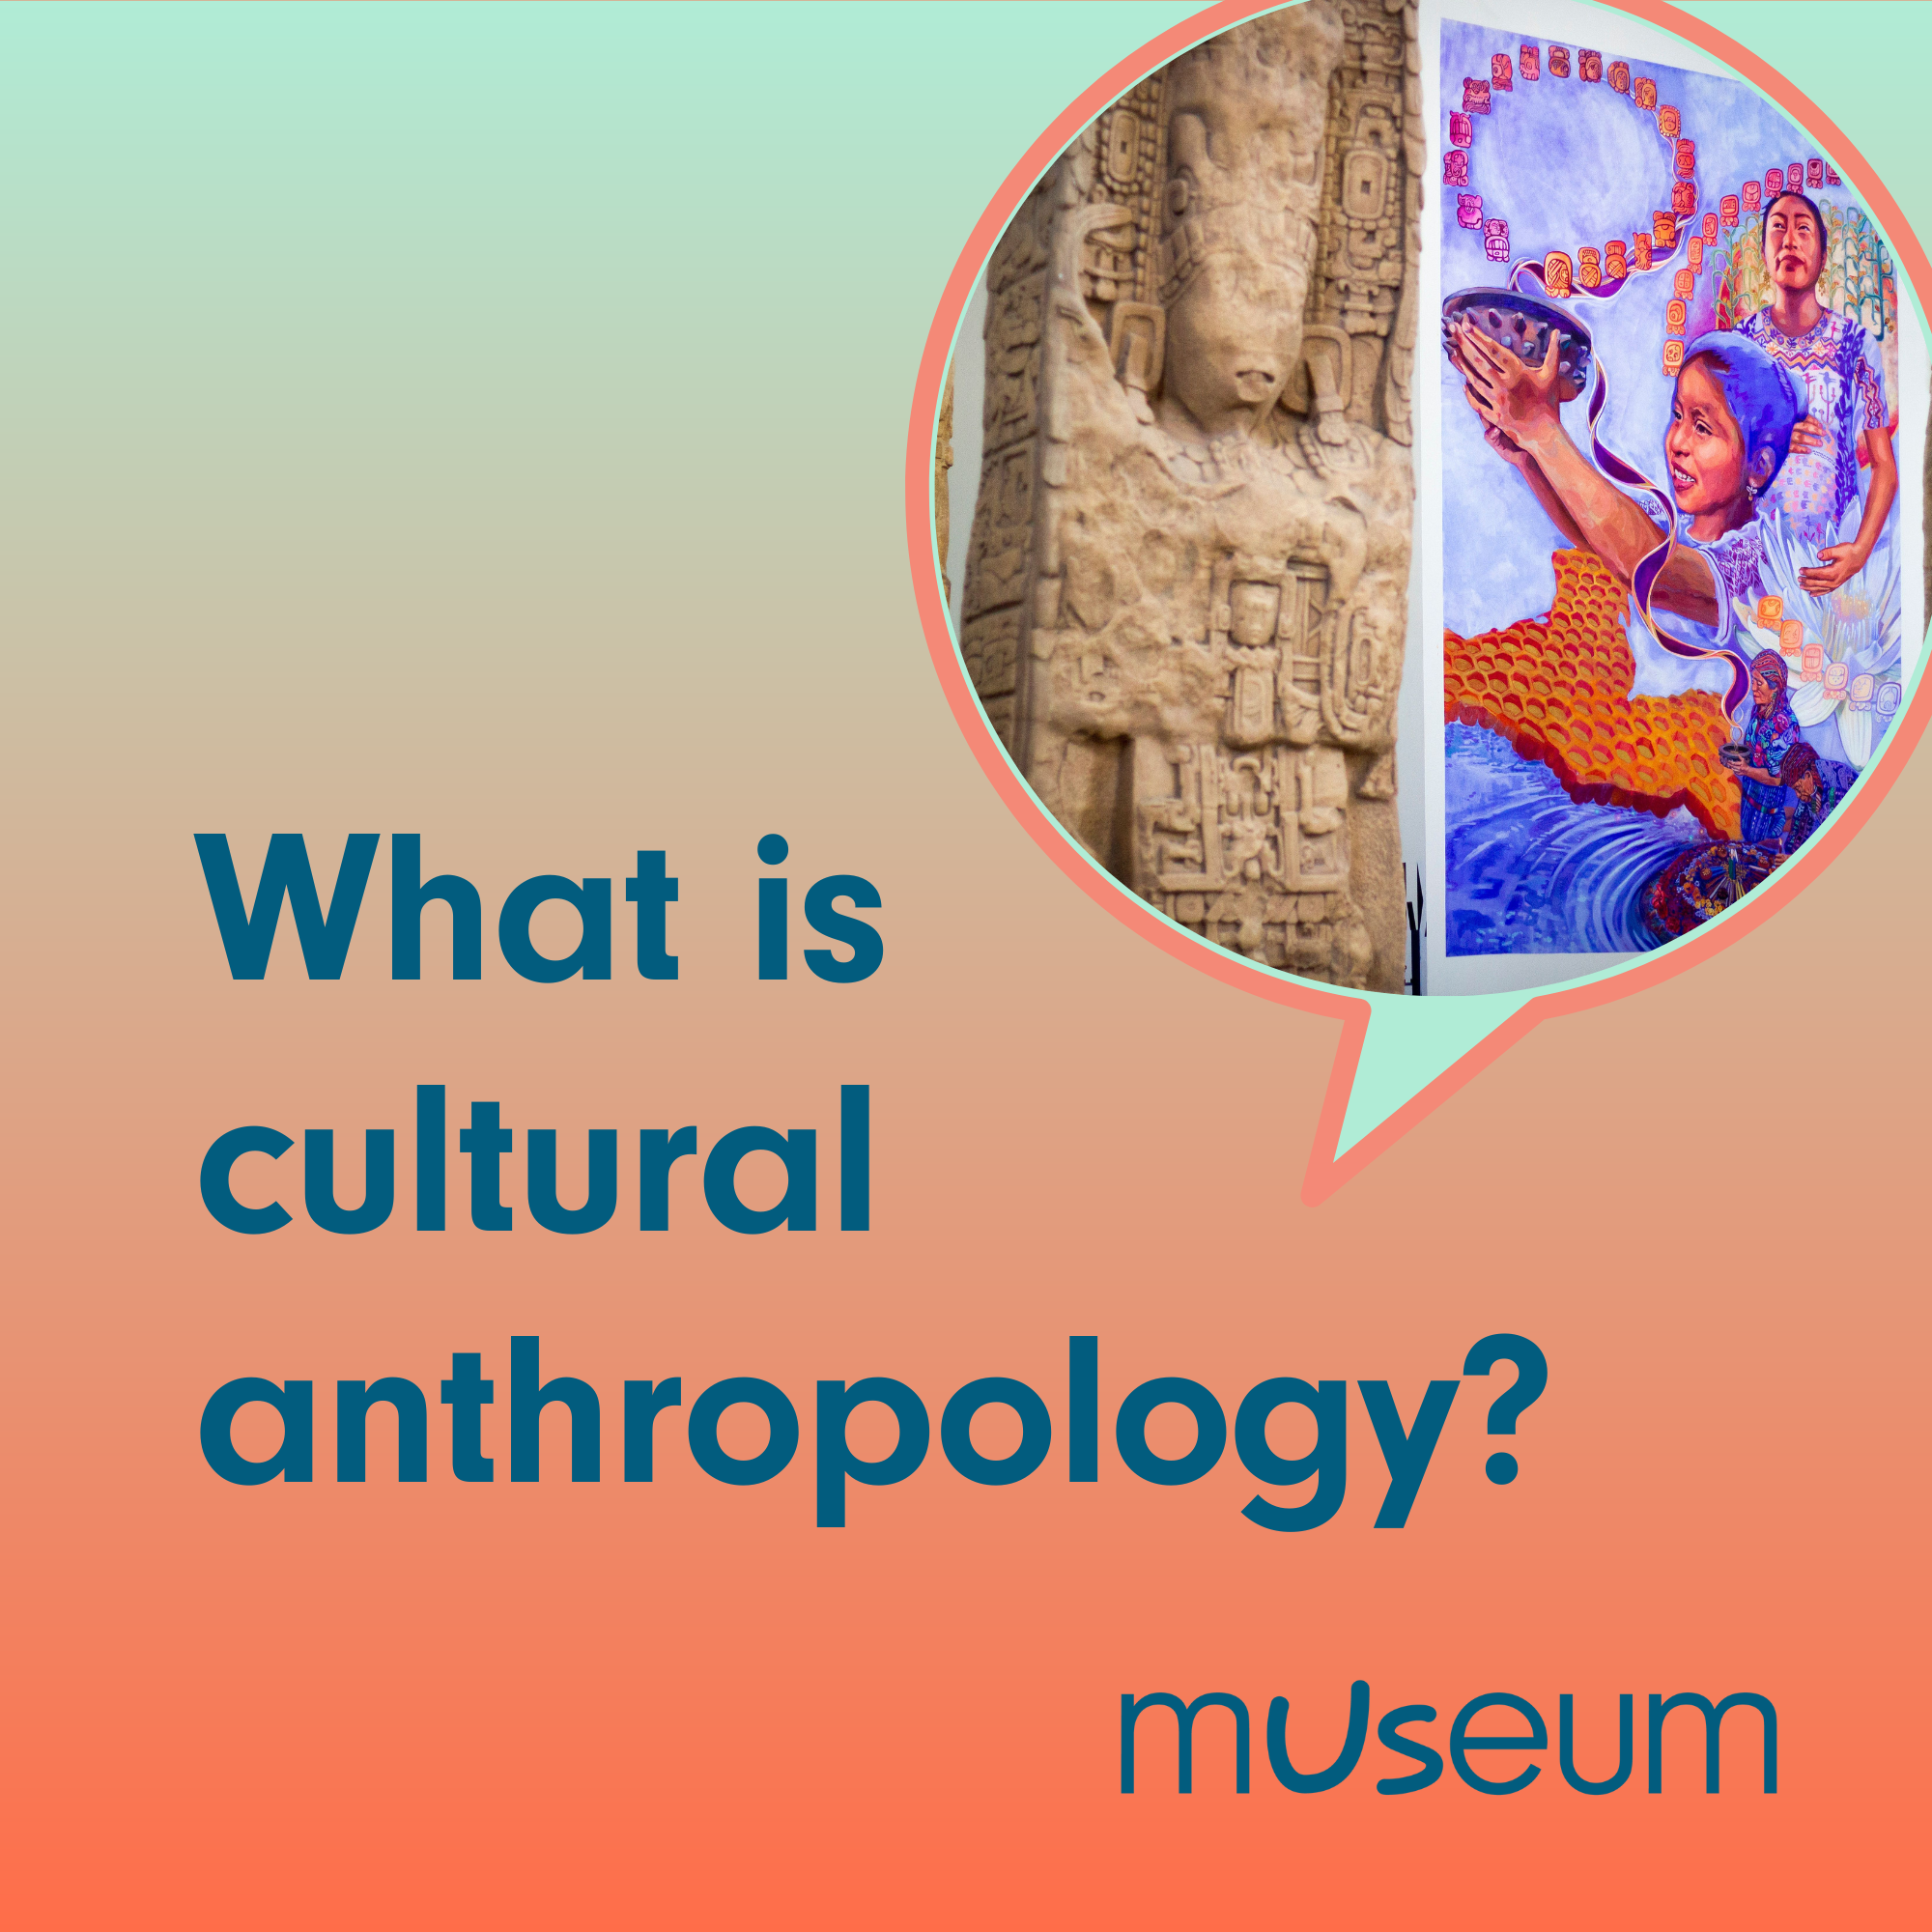 The first of two images in a set of graphics about cultural anthropology, with dark blue text on a green-to-orange gradient background. The text on this first image reads, "What is cultural anthropology?" and has a circular speech bubble with an image of the "Maya Peoples: Heart of Sky, Heart of Earth" exhibit. 